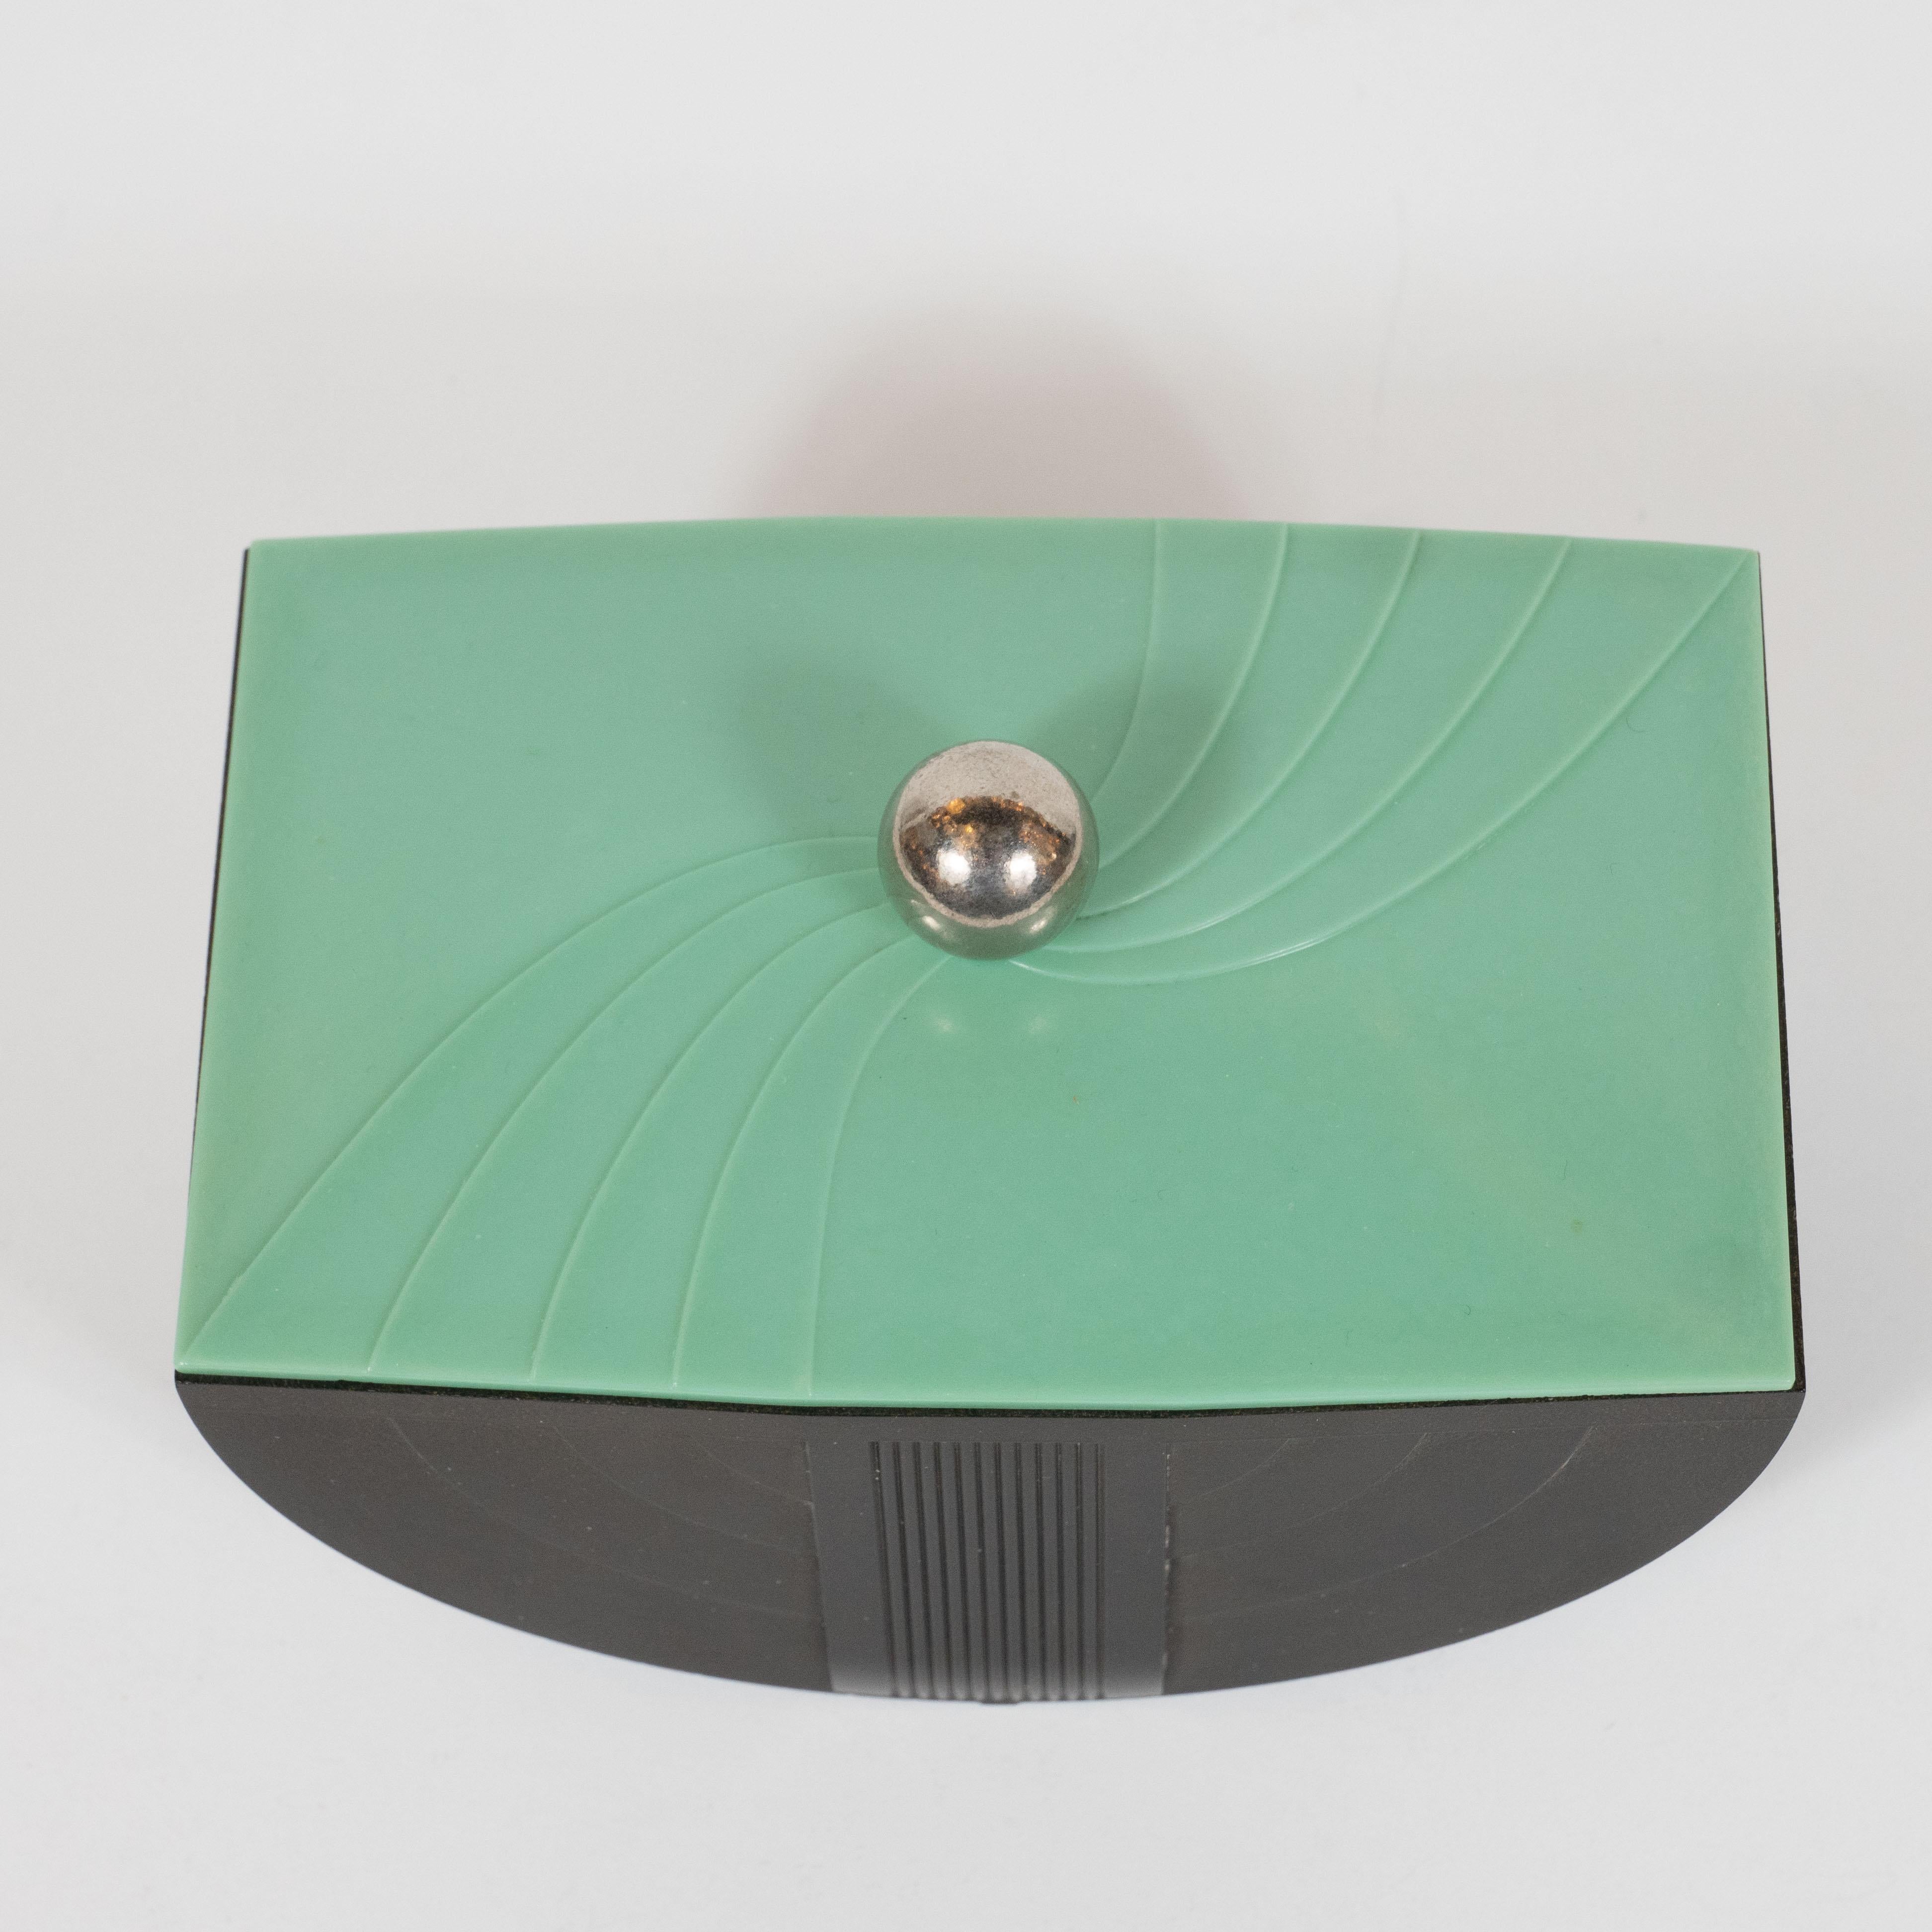 This elegant machine age Art Deco Bakelite box was realized in the United States, circa 1935. Sitting on spherical chrome feet, this stunning box features a demilune body in black Bakelite with streamlined designs tracing the demilune form of the